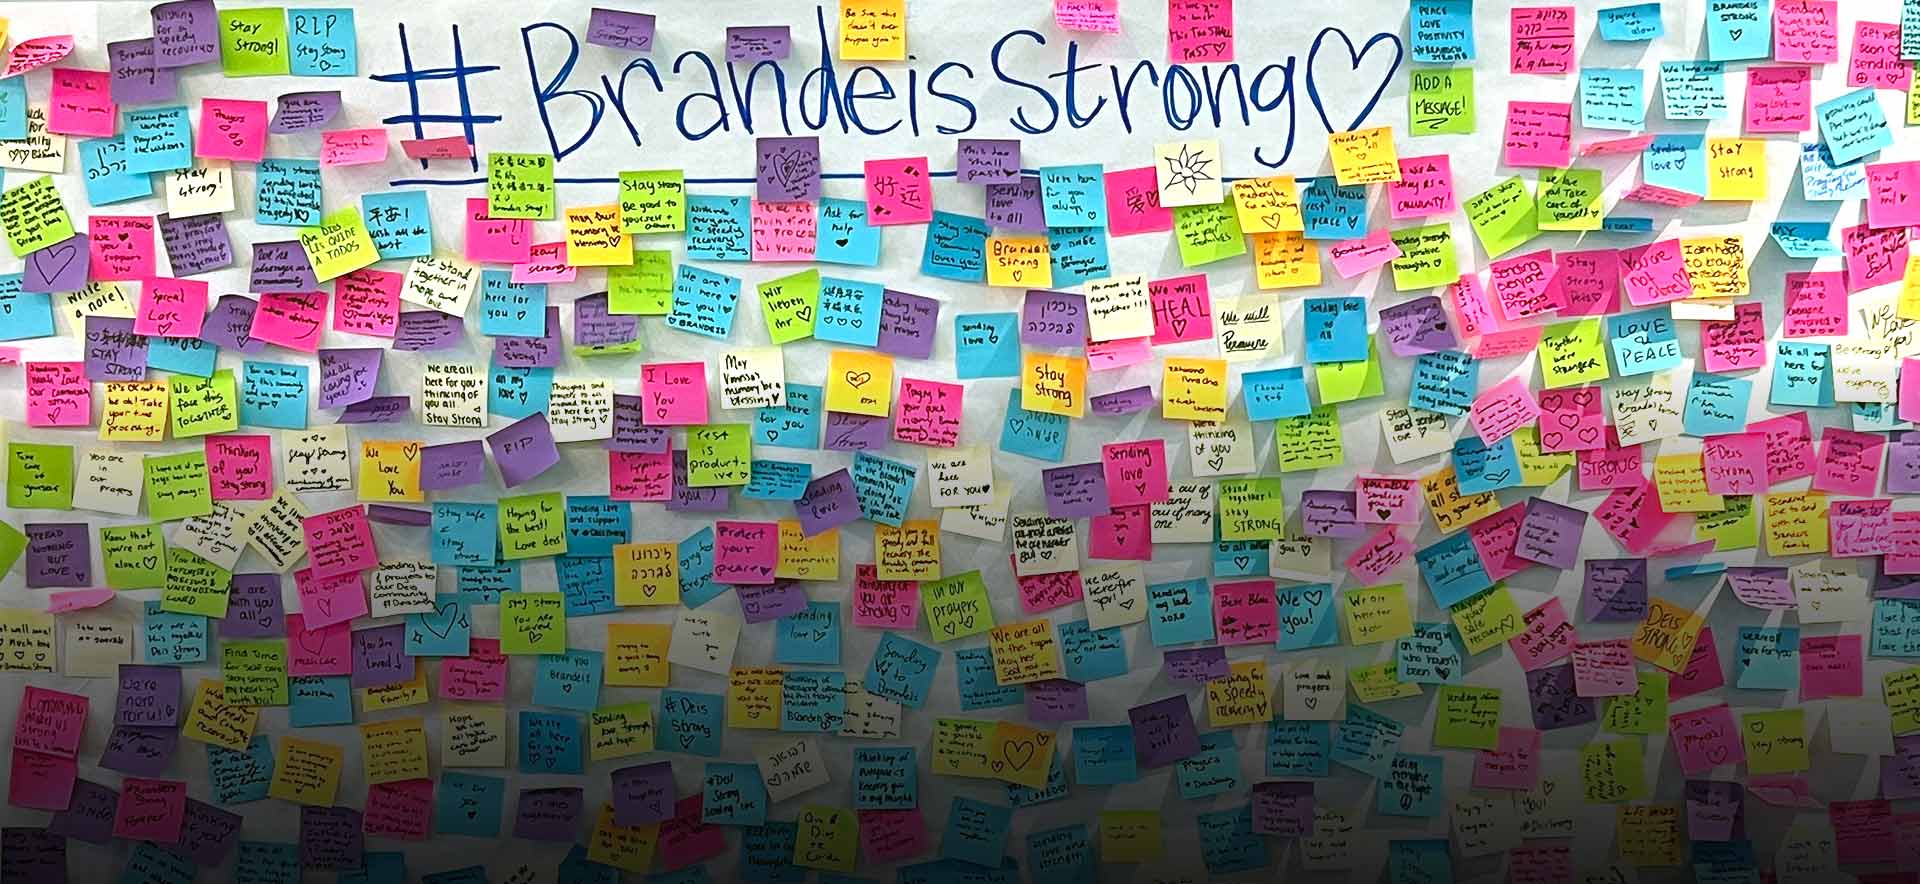 The hashtag Brandeis Strong with a heart is written at the top of a large poster-sized paper. There are many colorful post-it notes stuck on the paper with supportive messages from community members.